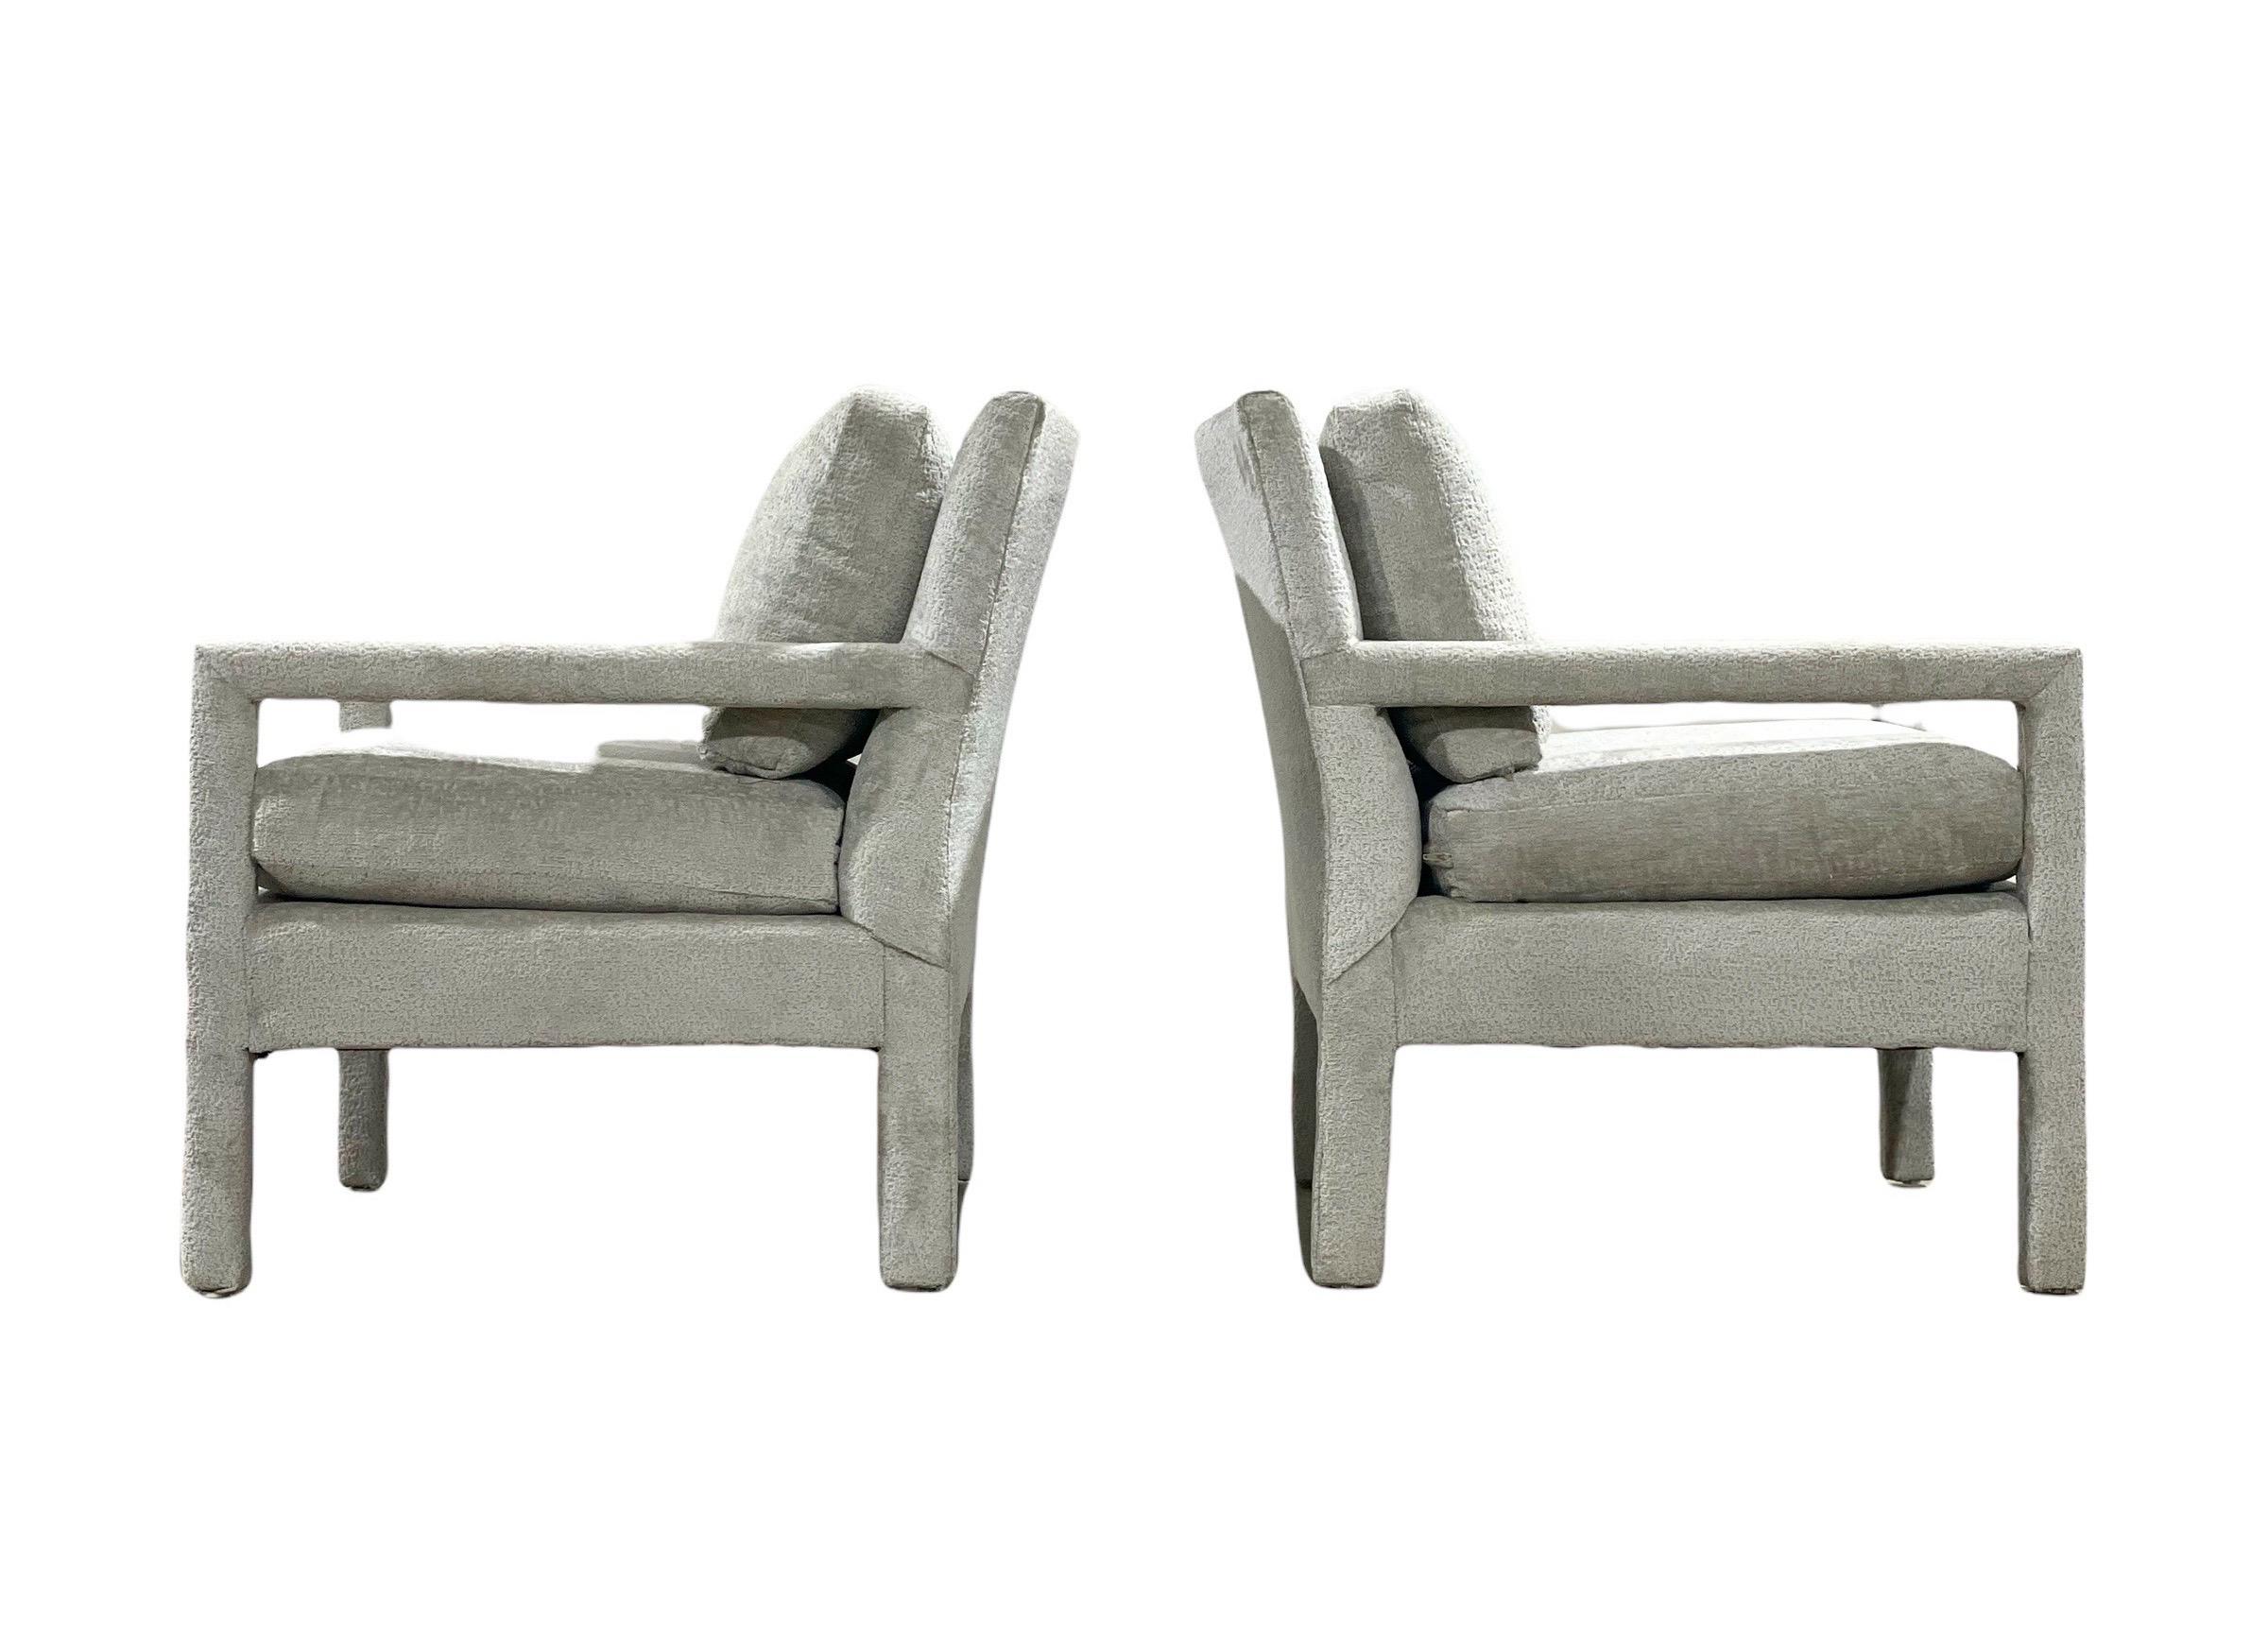 Pair Midcentury Parsons Style Lounge Chairs by Bernhardt, After Milo Baughman In Good Condition For Sale In Decatur, GA